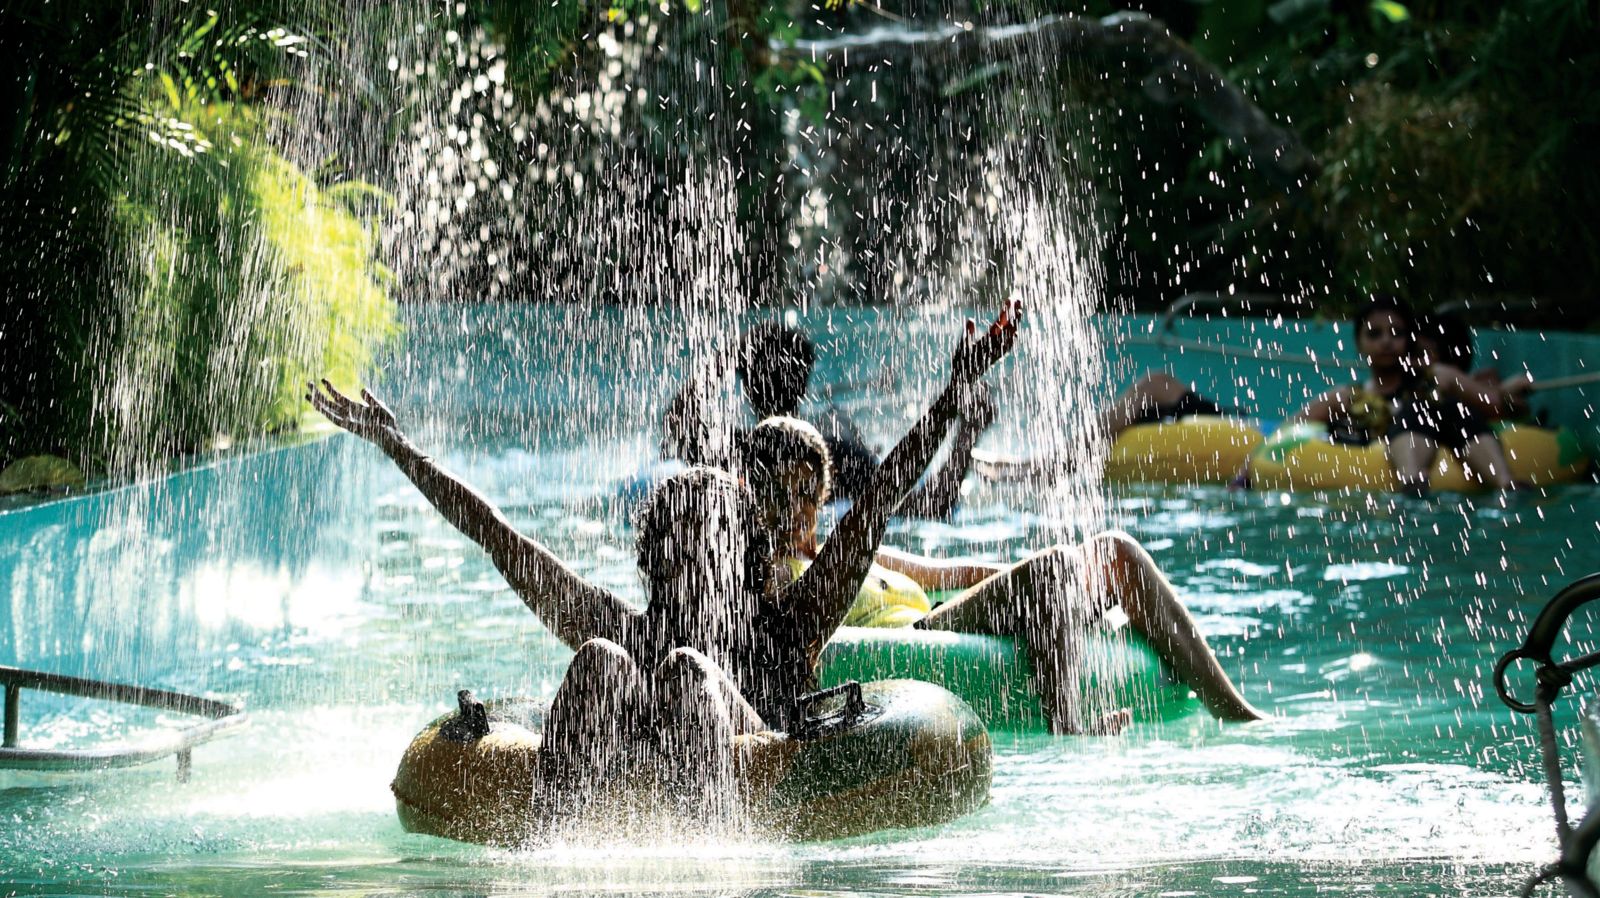 Water sparying as people float on water tubes